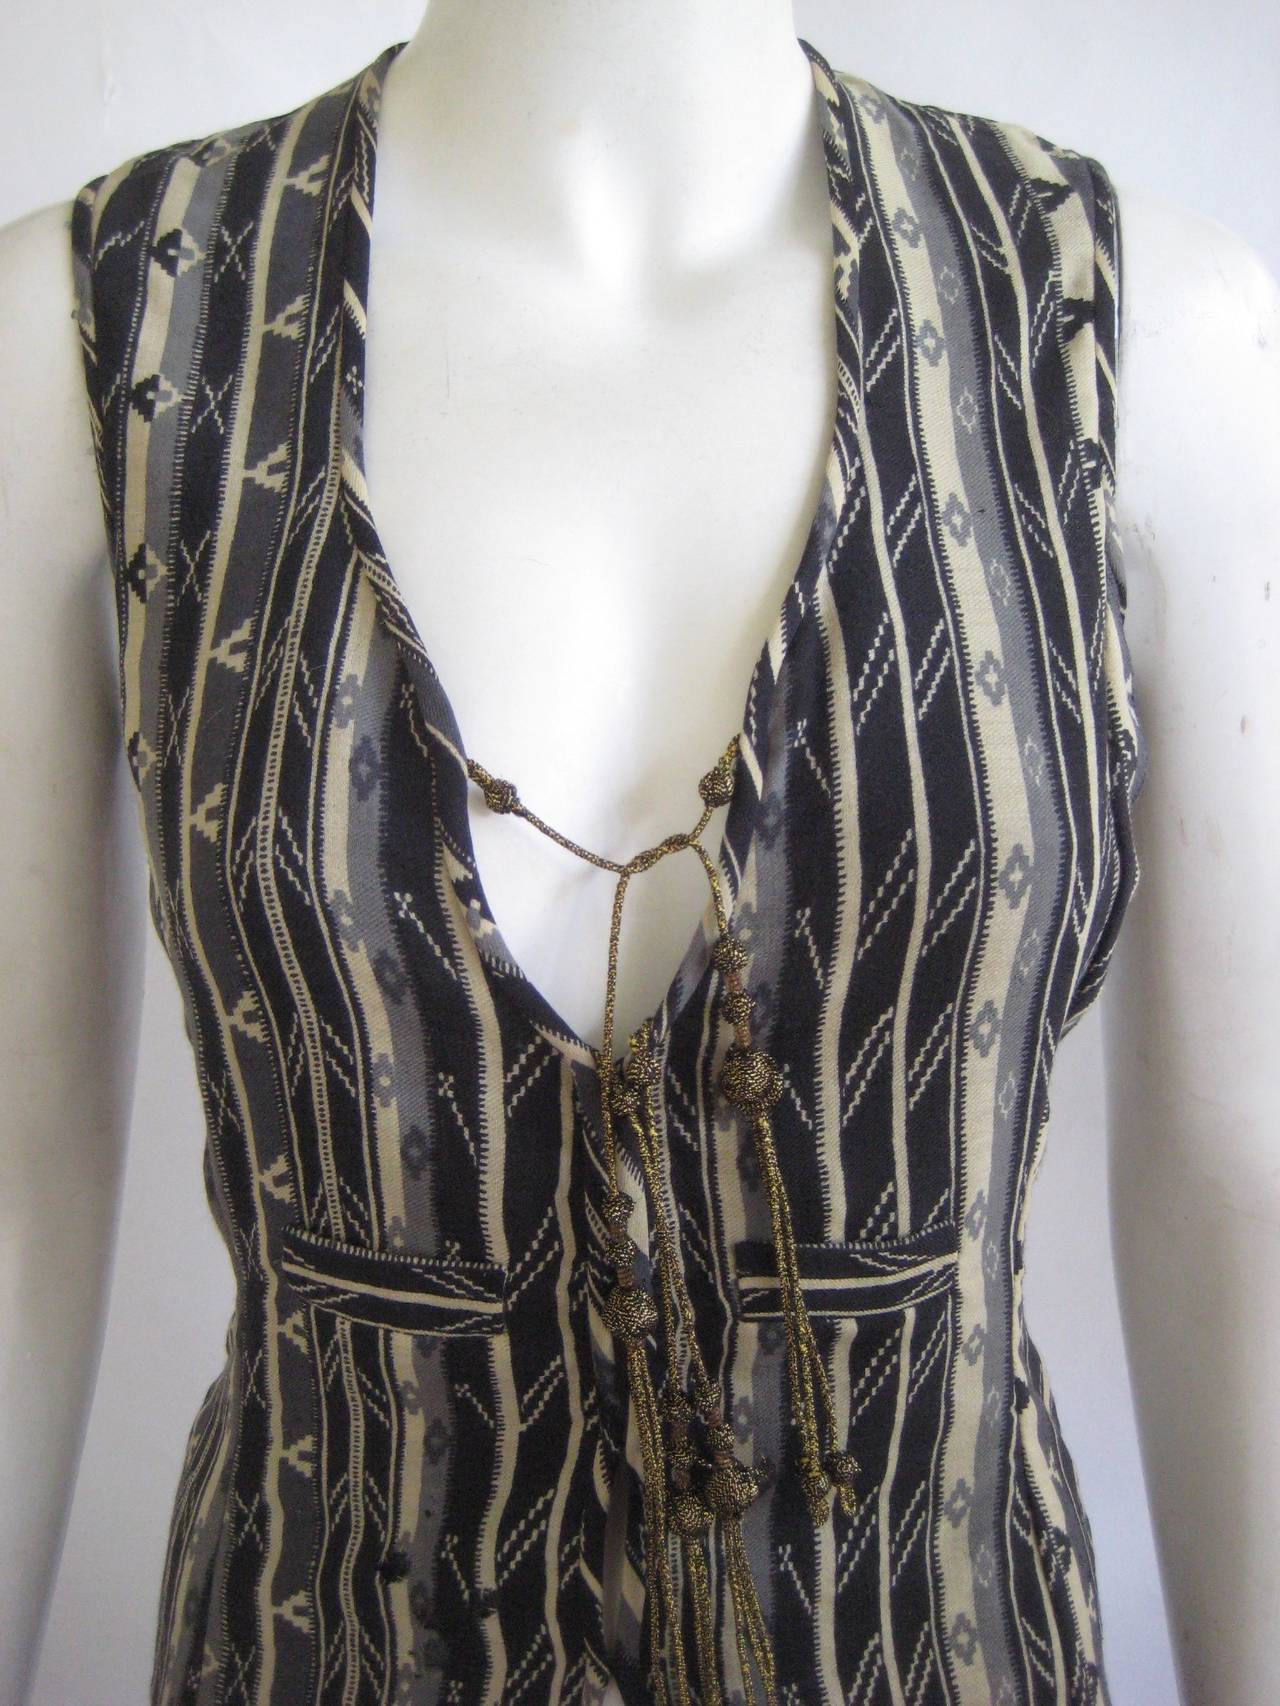 This one is a bit of a heartbreaker but I would wear it to shreds if it fit me .It is made of a fine wool ikat lined in black silk chiffon with Thea's signature gold tassels .It fastens down the front with hidden hook and eyes.I don't think it was